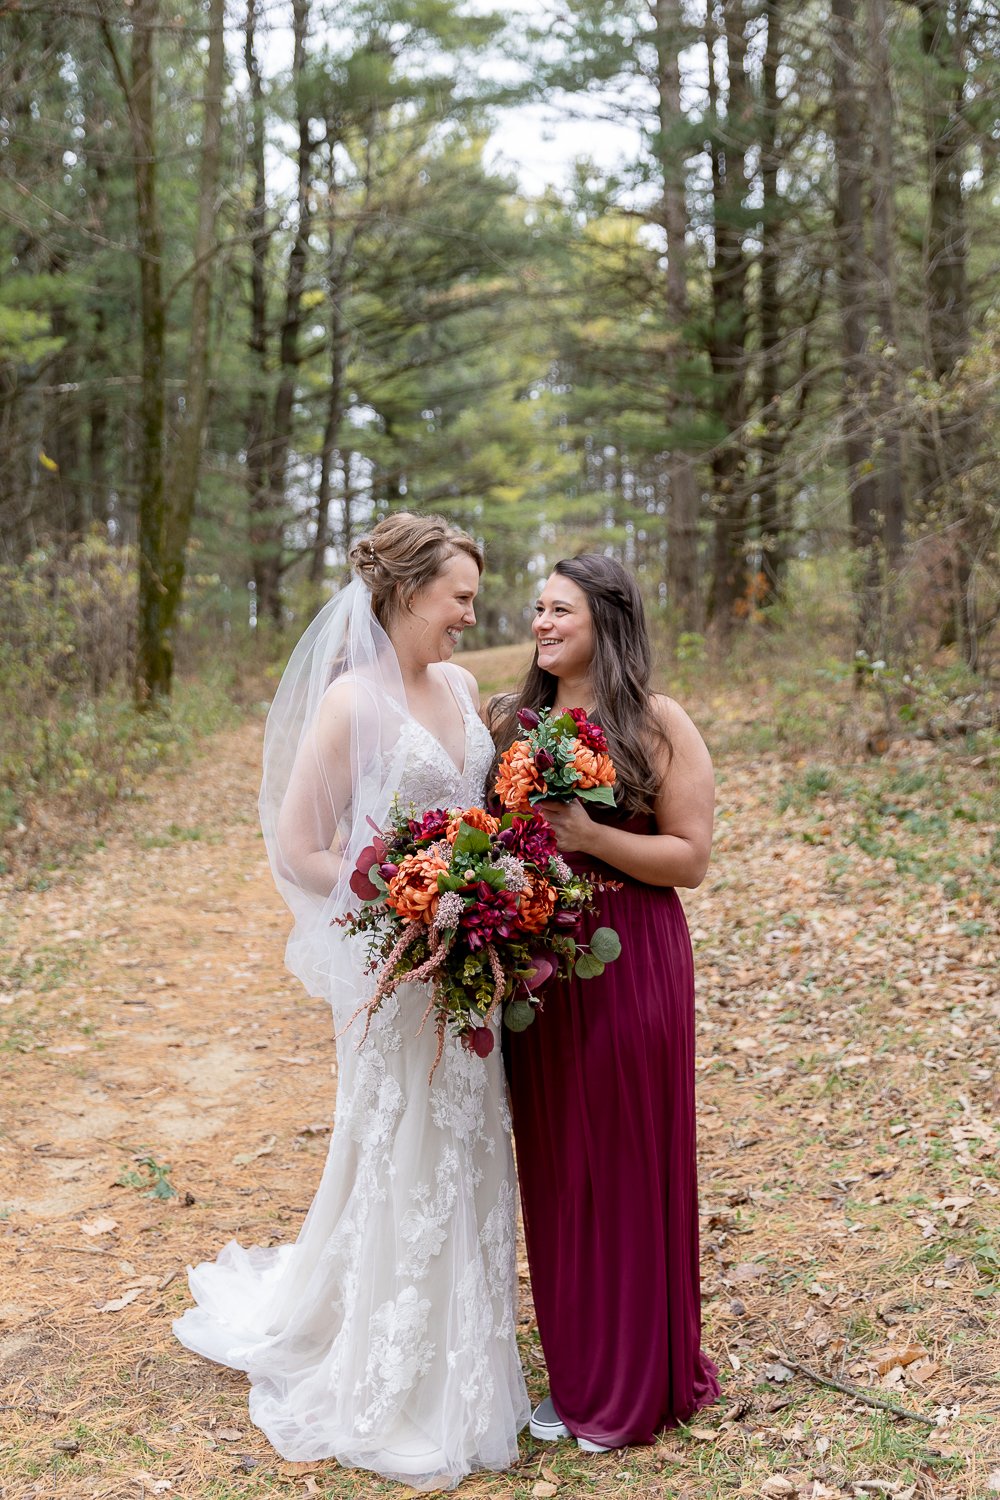 Wedding Party Photos at Wildcat mountain State Park